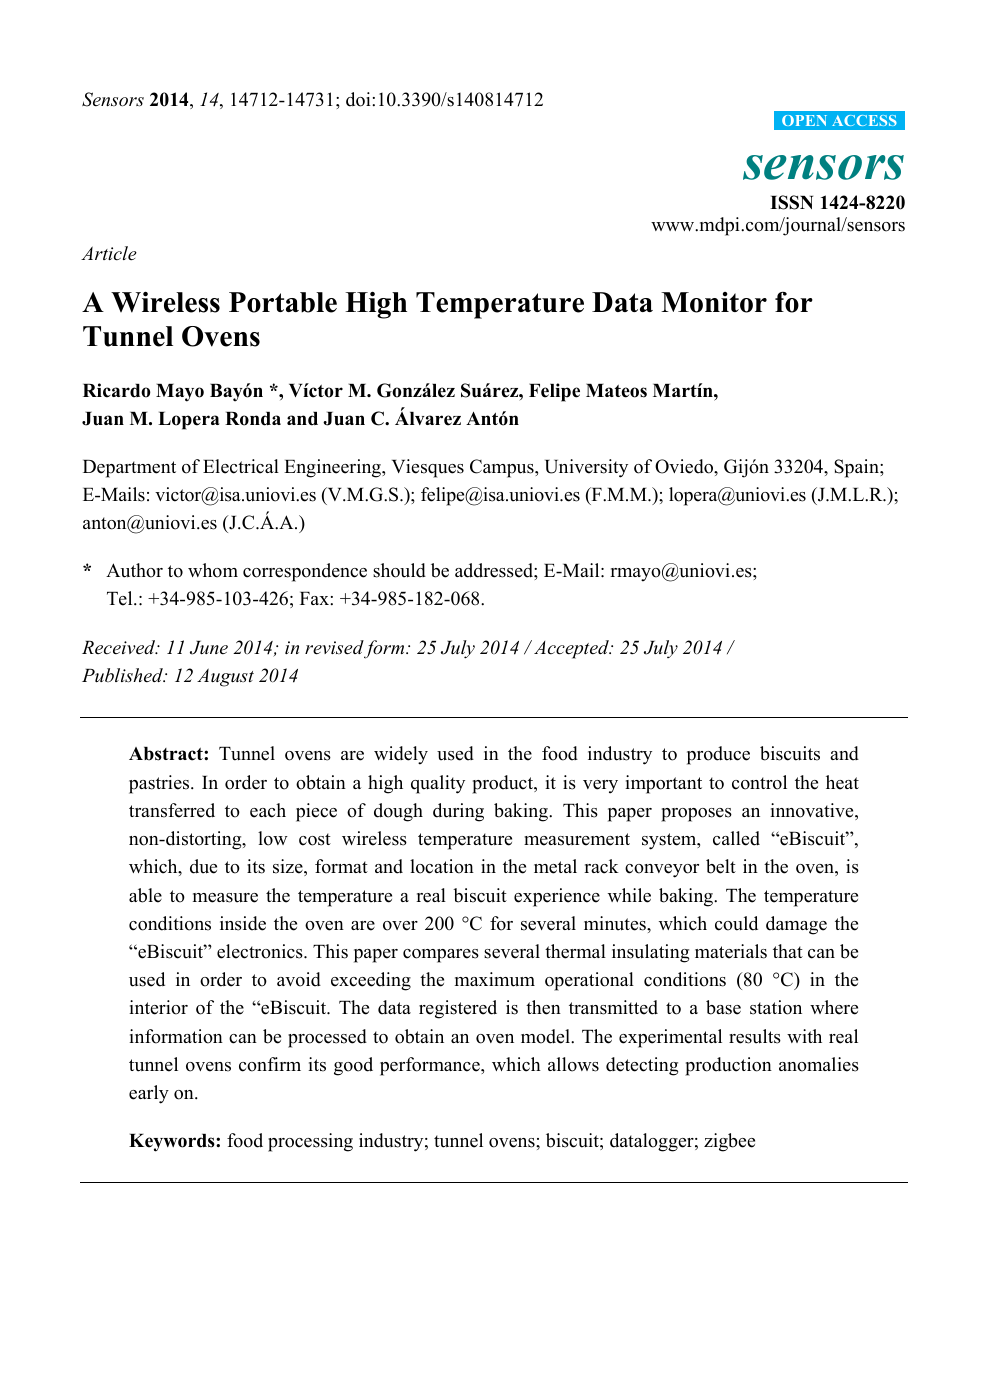 A Wireless Portable High Temperature Data Monitor For Tunnel Ovens Topic Of Research Paper In Electrical Engineering Electronic Engineering Information Engineering Download Scholarly Article Pdf And Read For Free On Cyberleninka